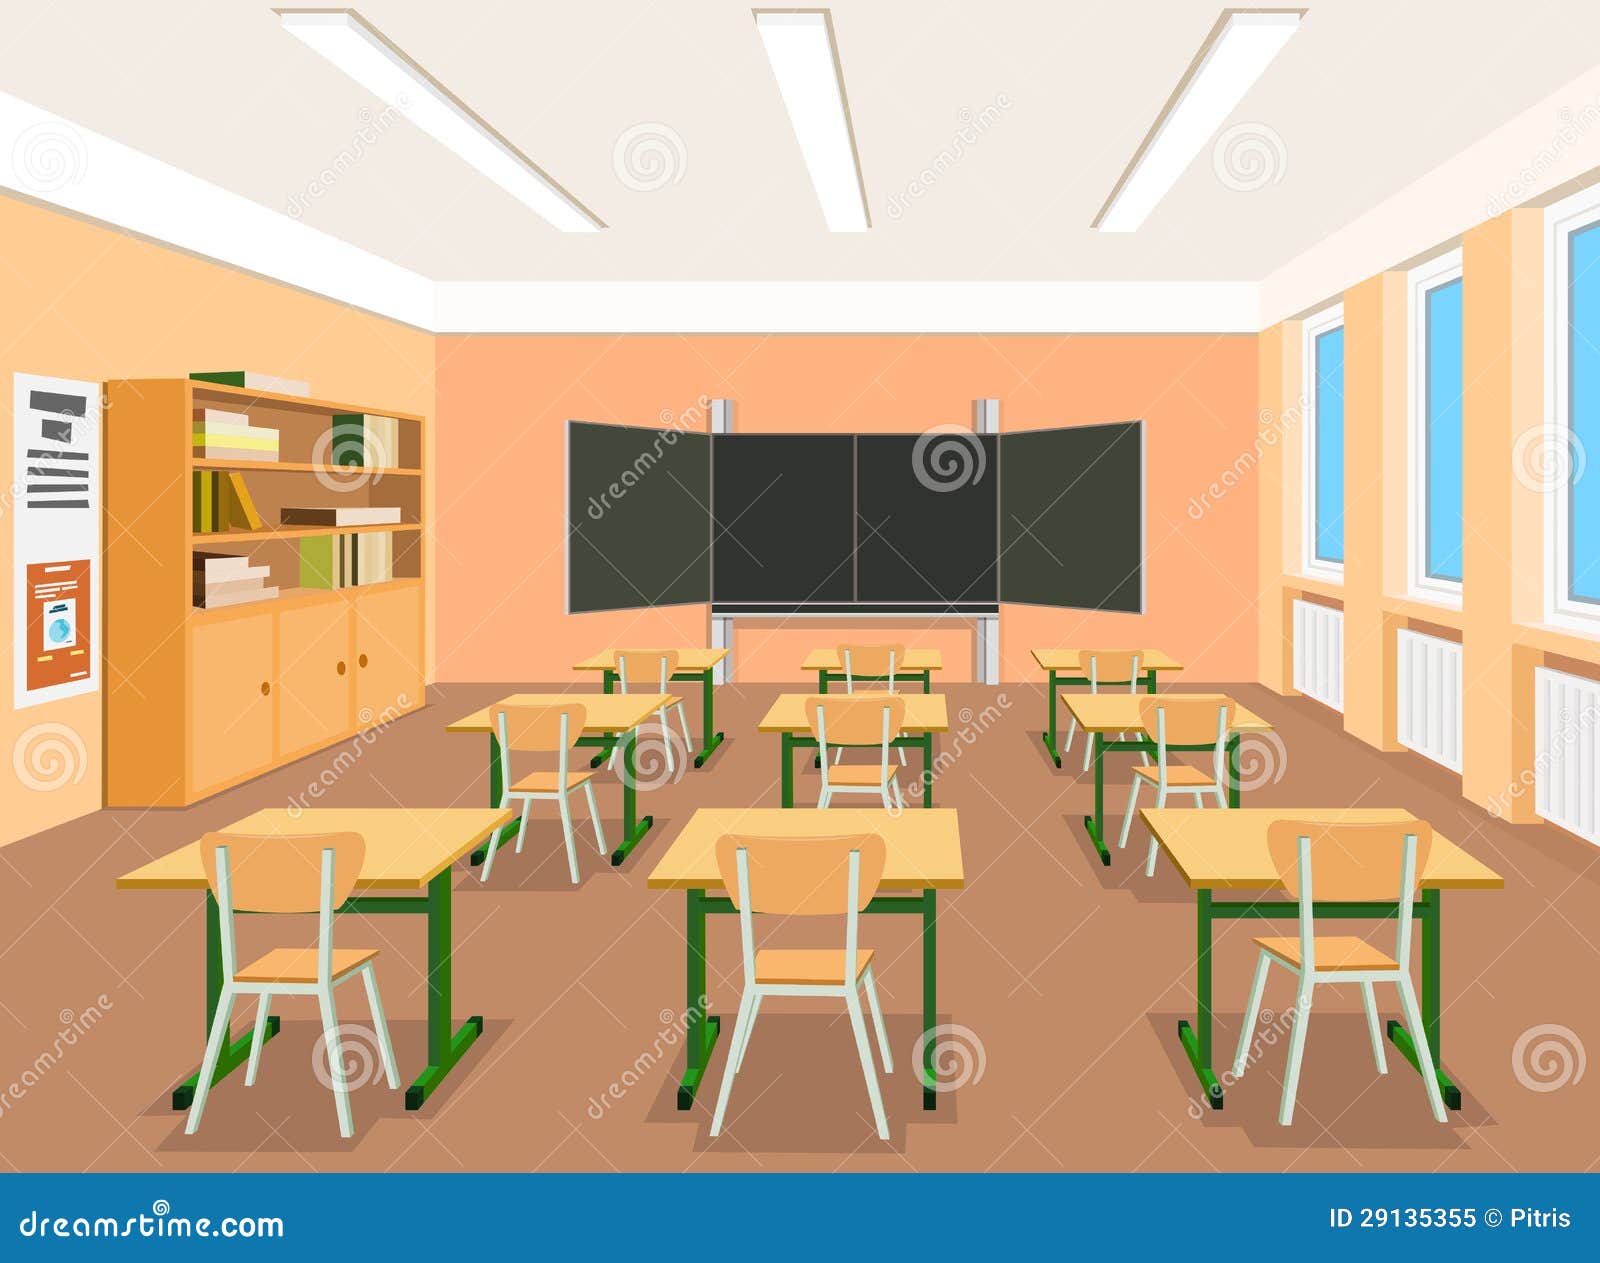 classroom clipart background - photo #28